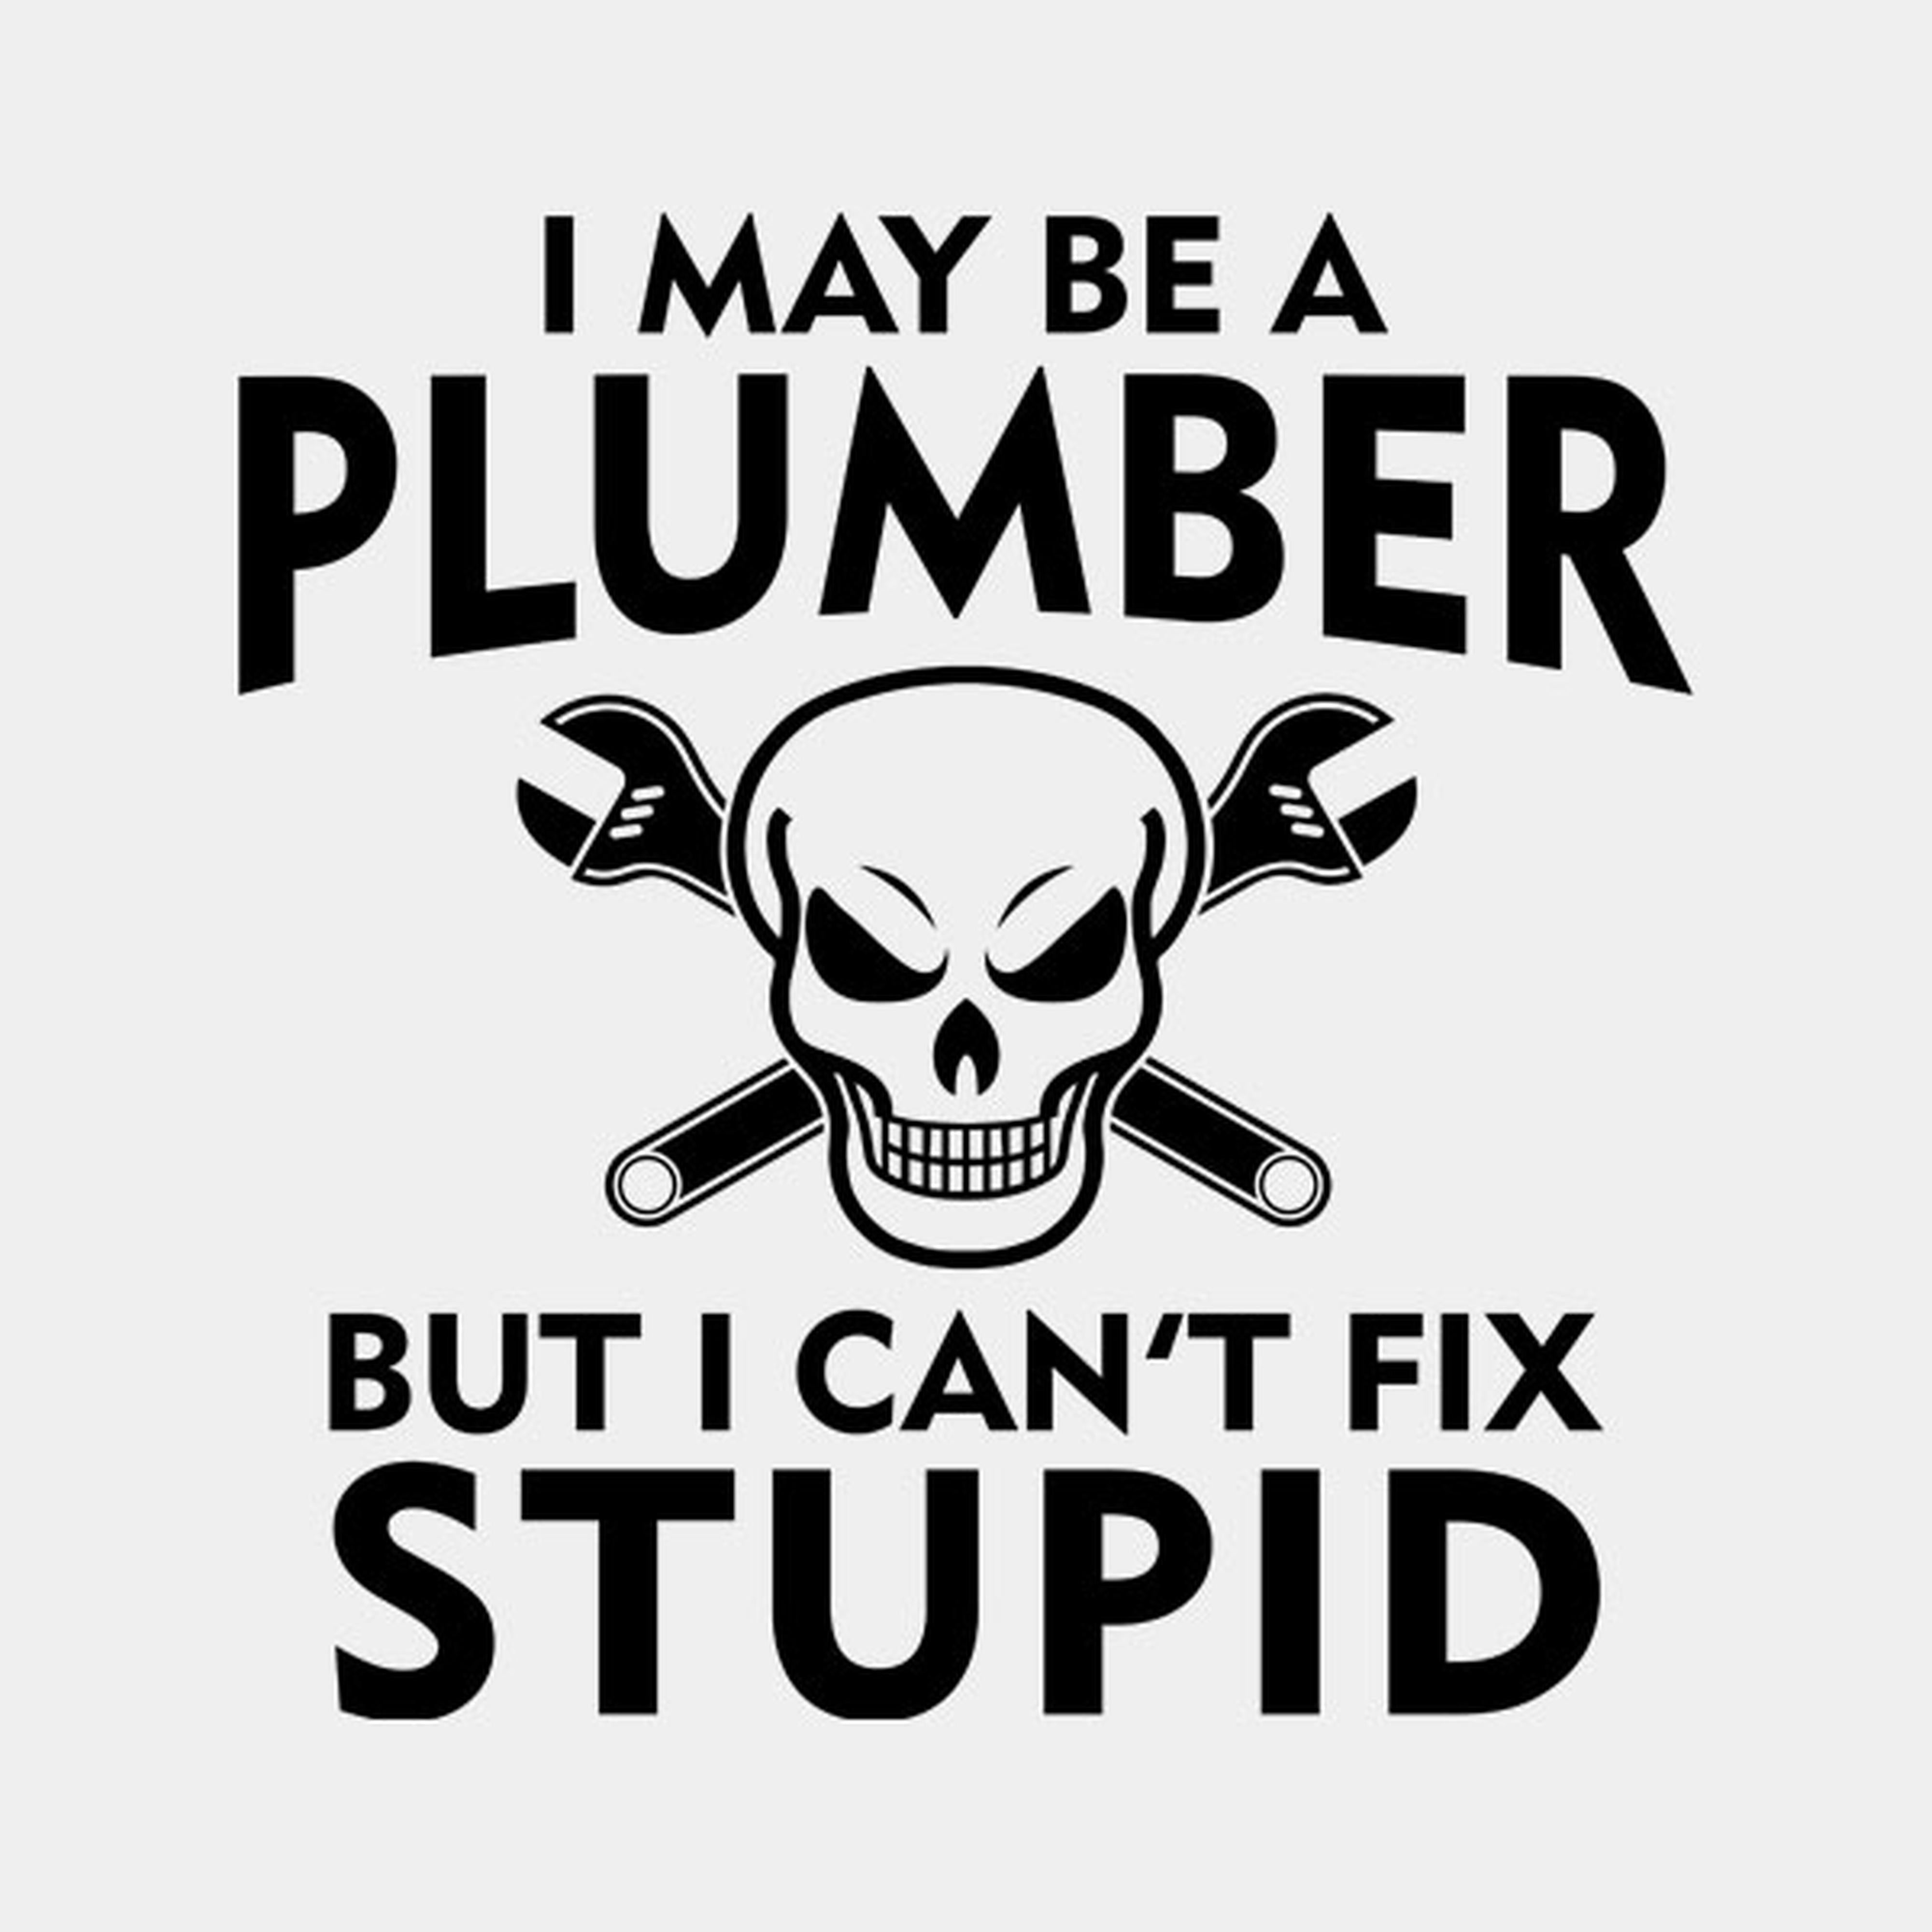 I may be a plumber but I can't fix stupid - T-shirt